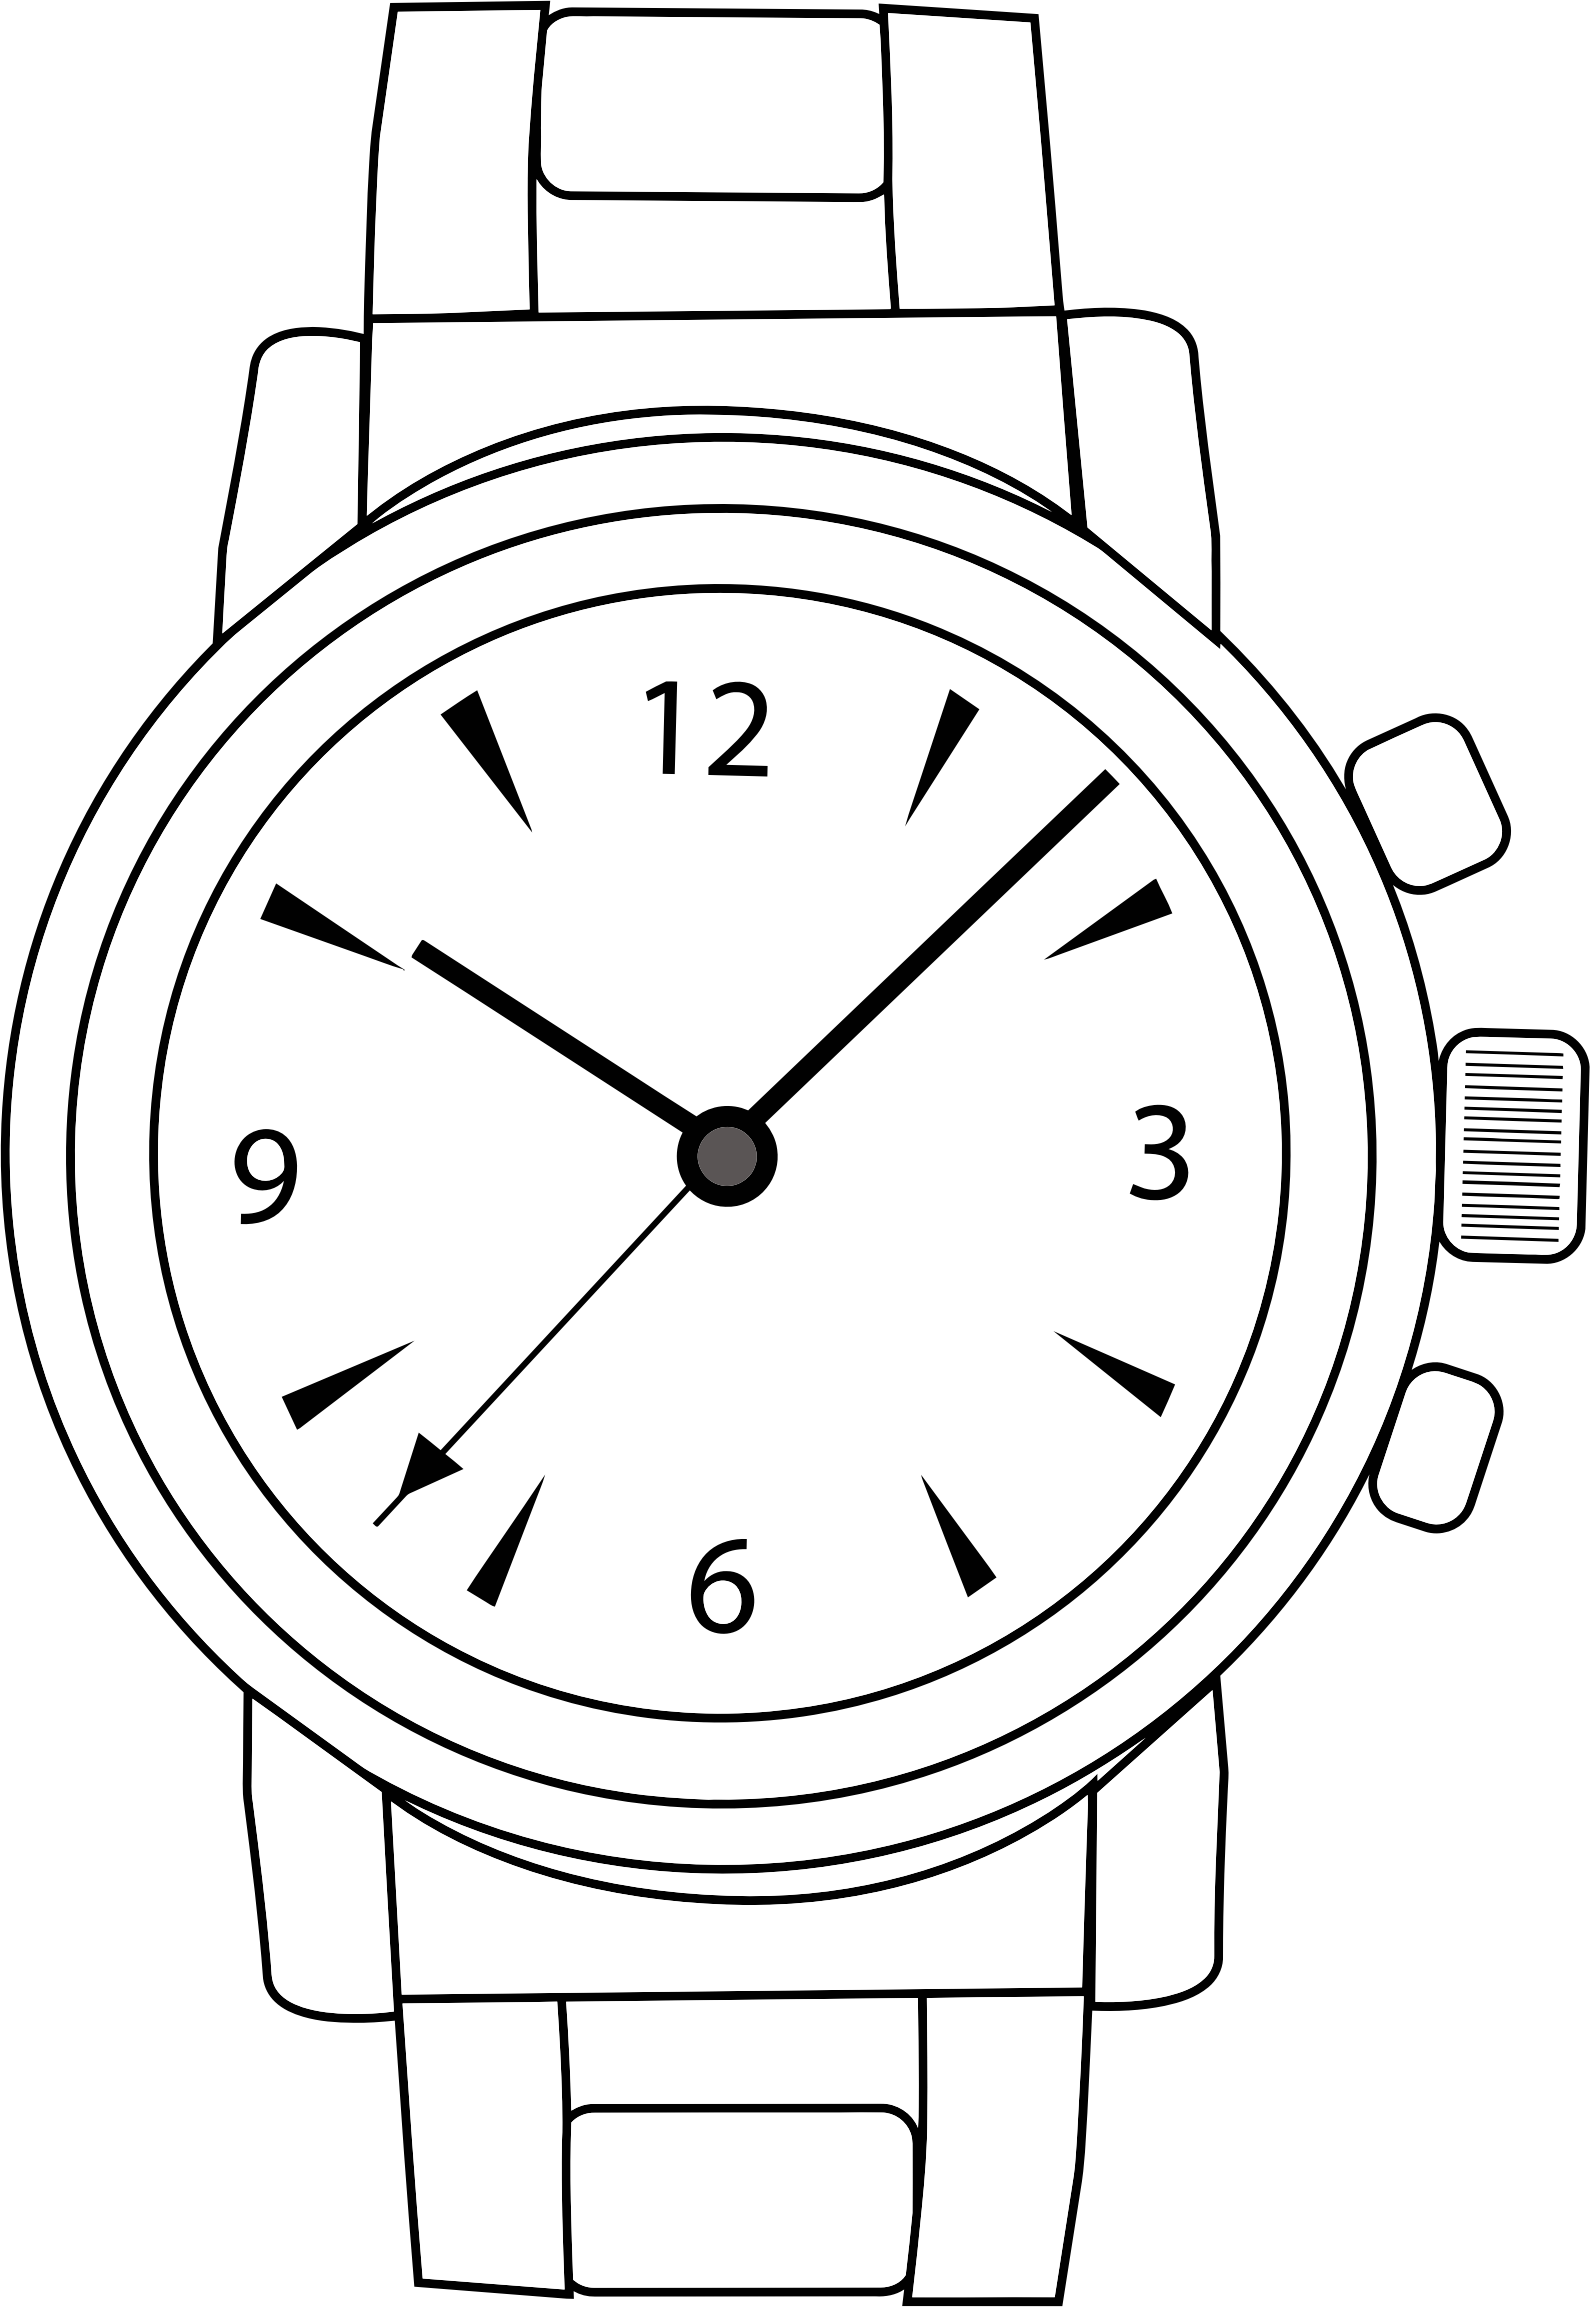 Wrist Watch For Coloring Pages Sketch Coloring Page